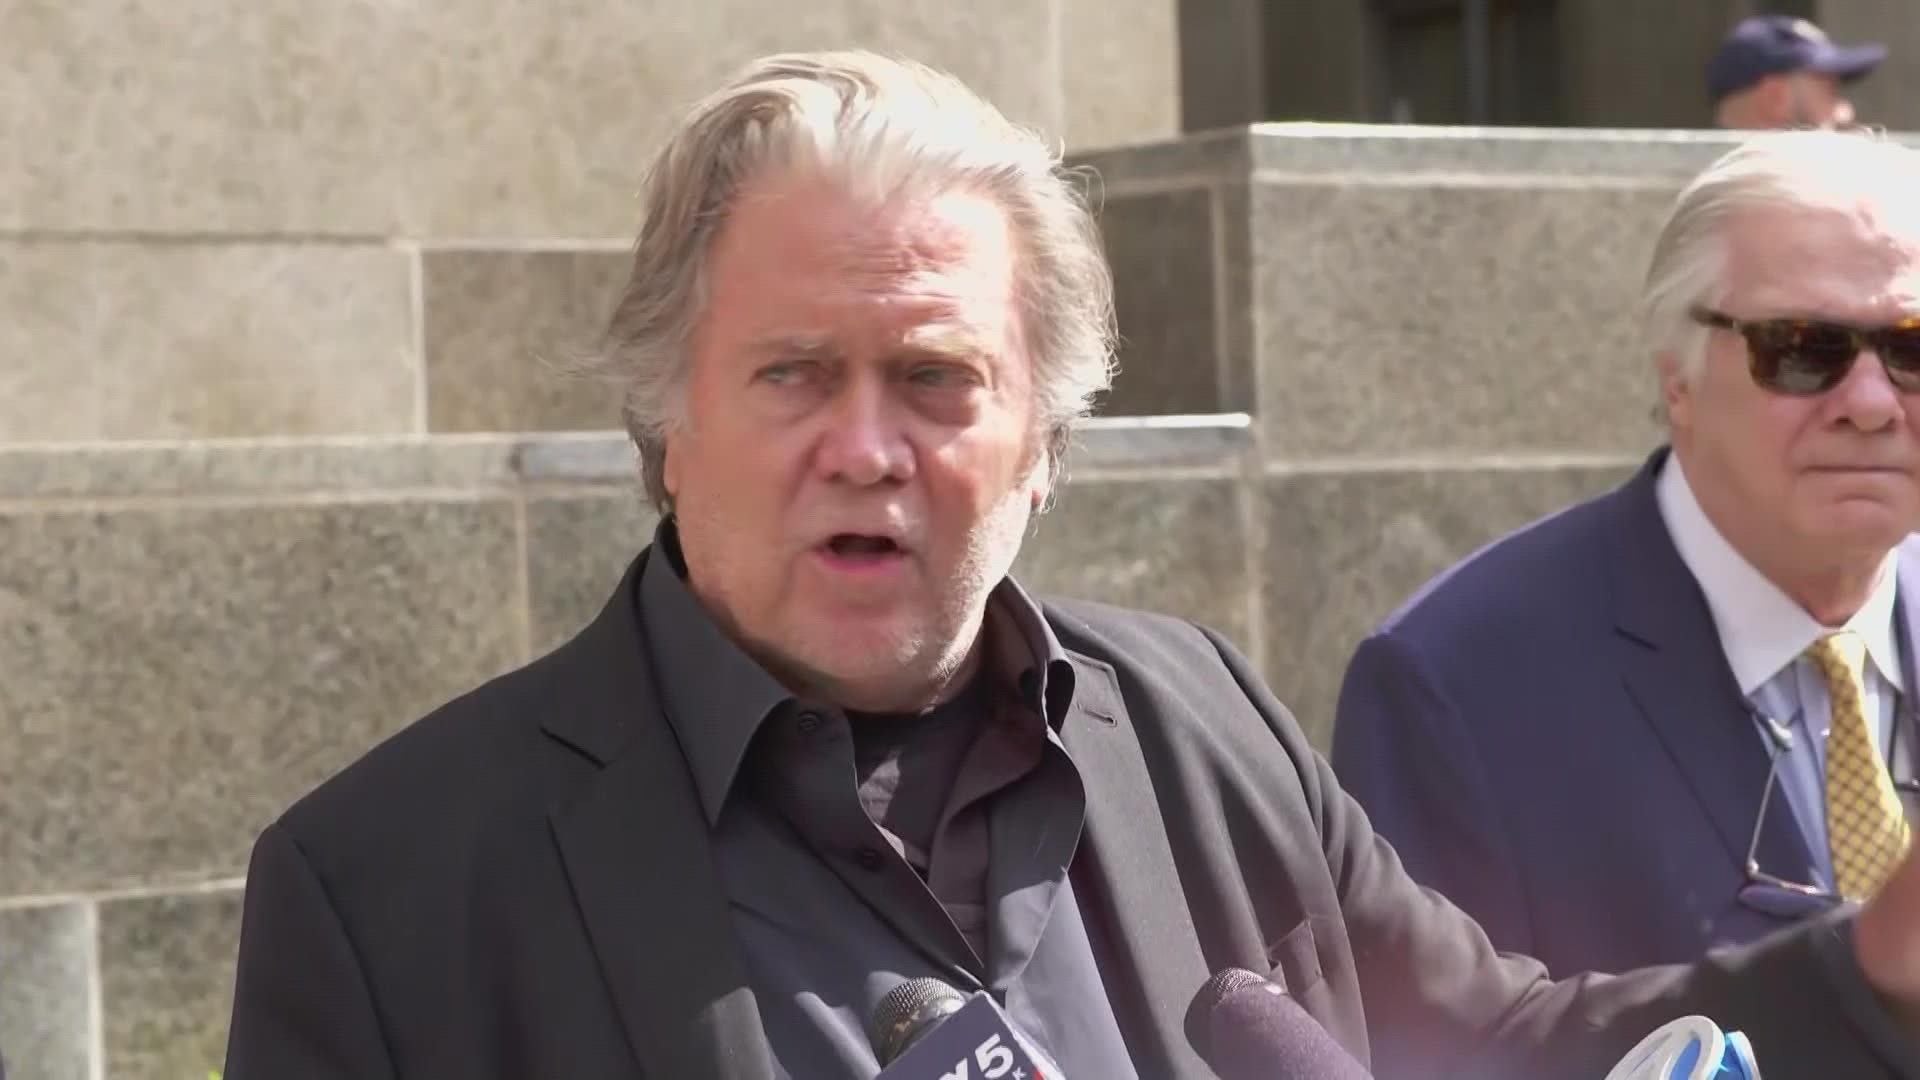 An earlier federal prosecution on similar charges ended before trial when Trump pardoned Bannon on his last day in office.